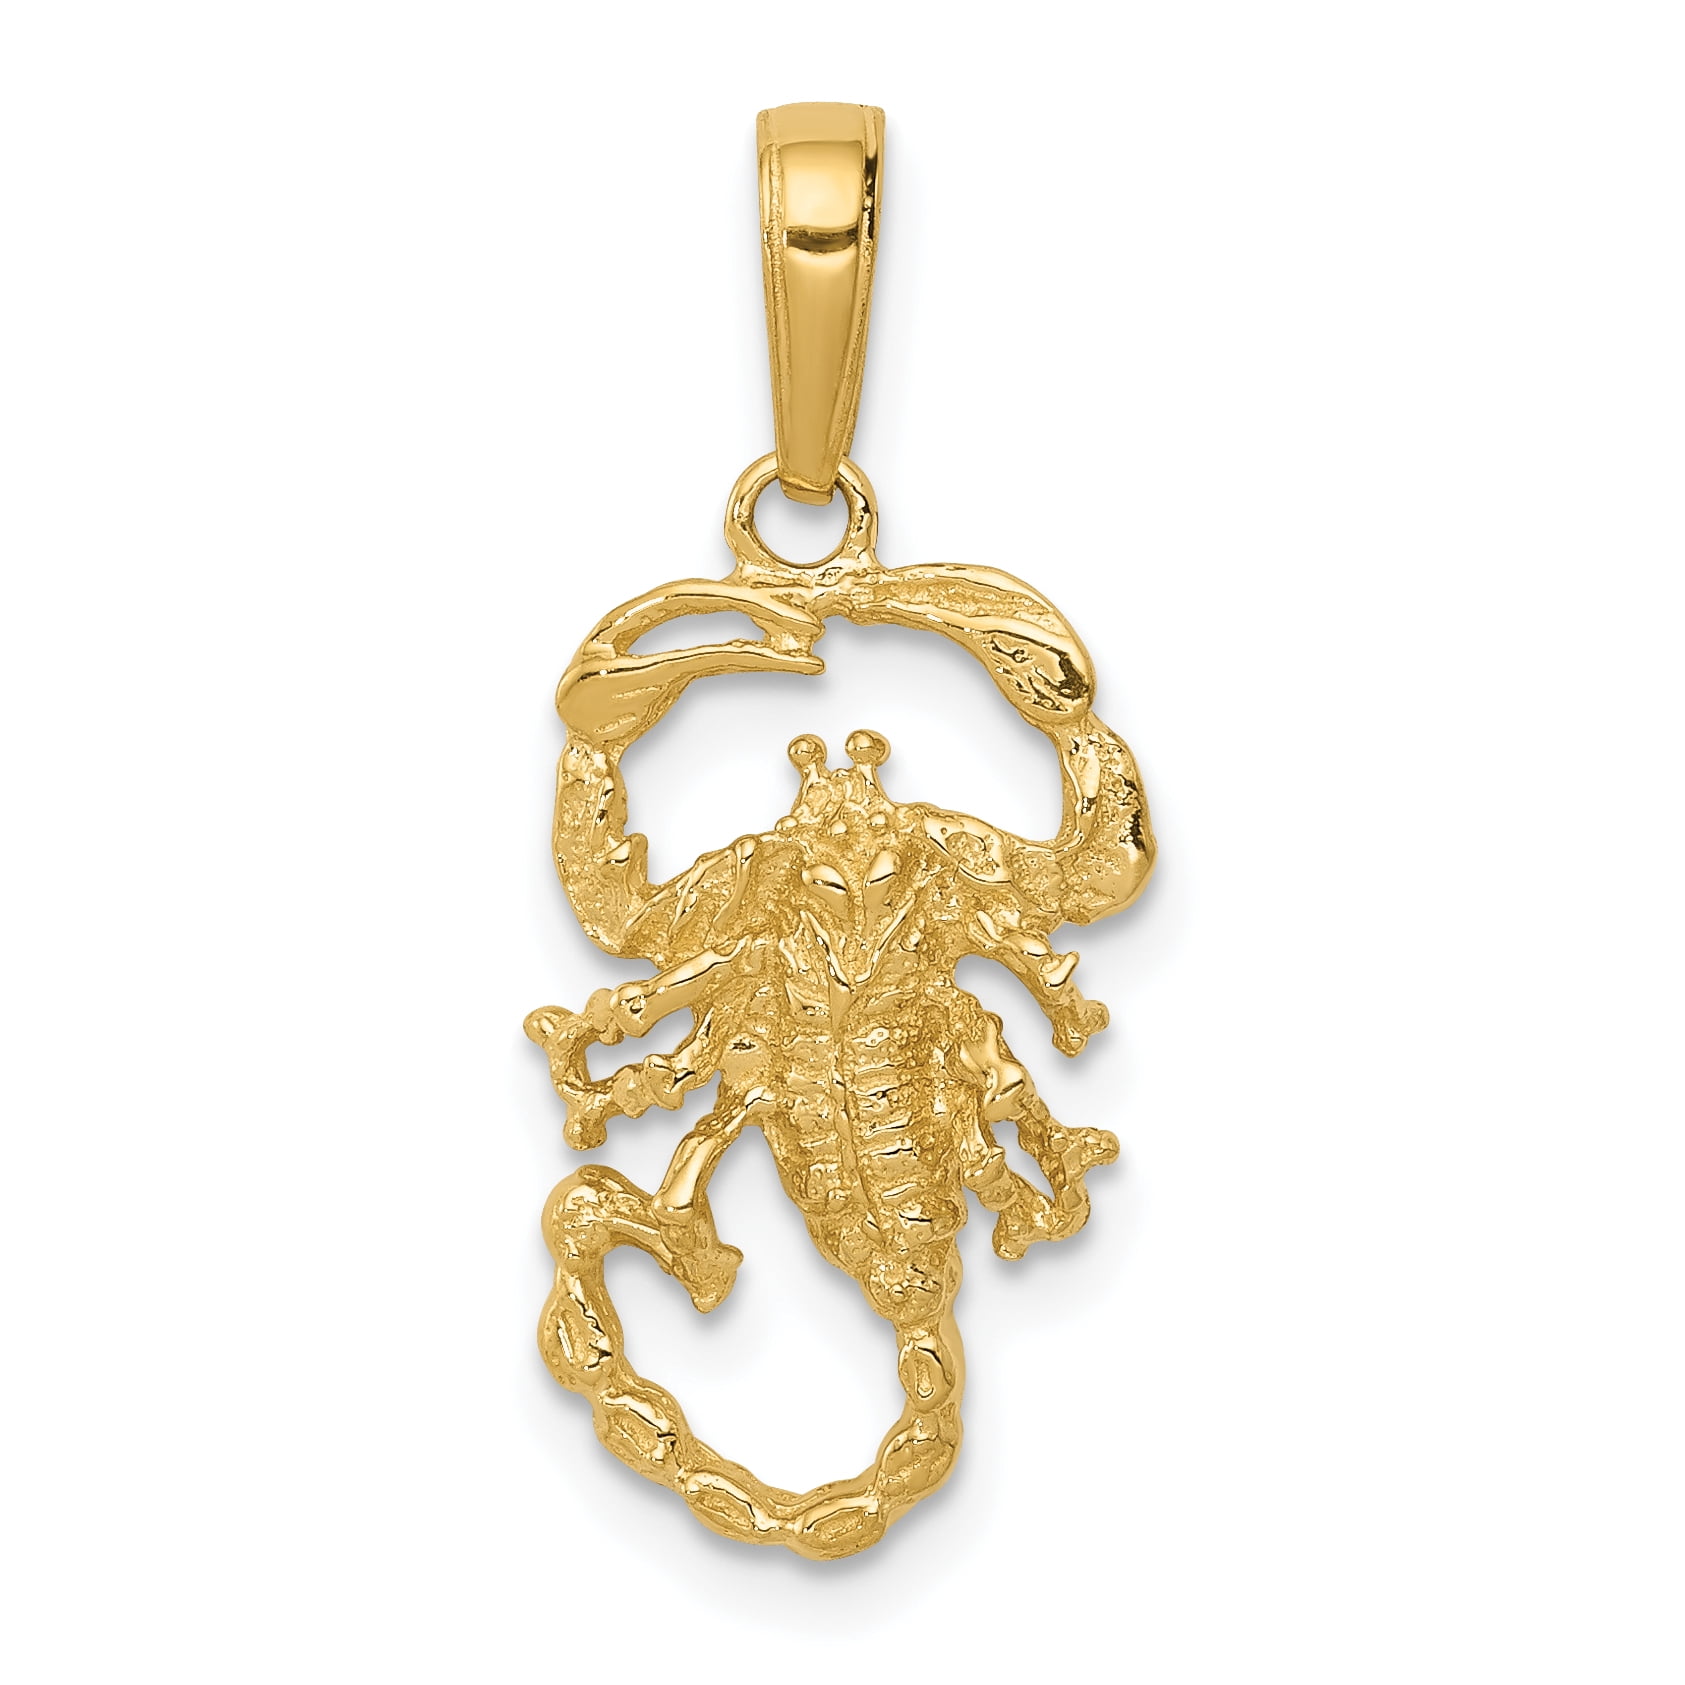 25mm Silver Yellow Plated Scorpion Charm